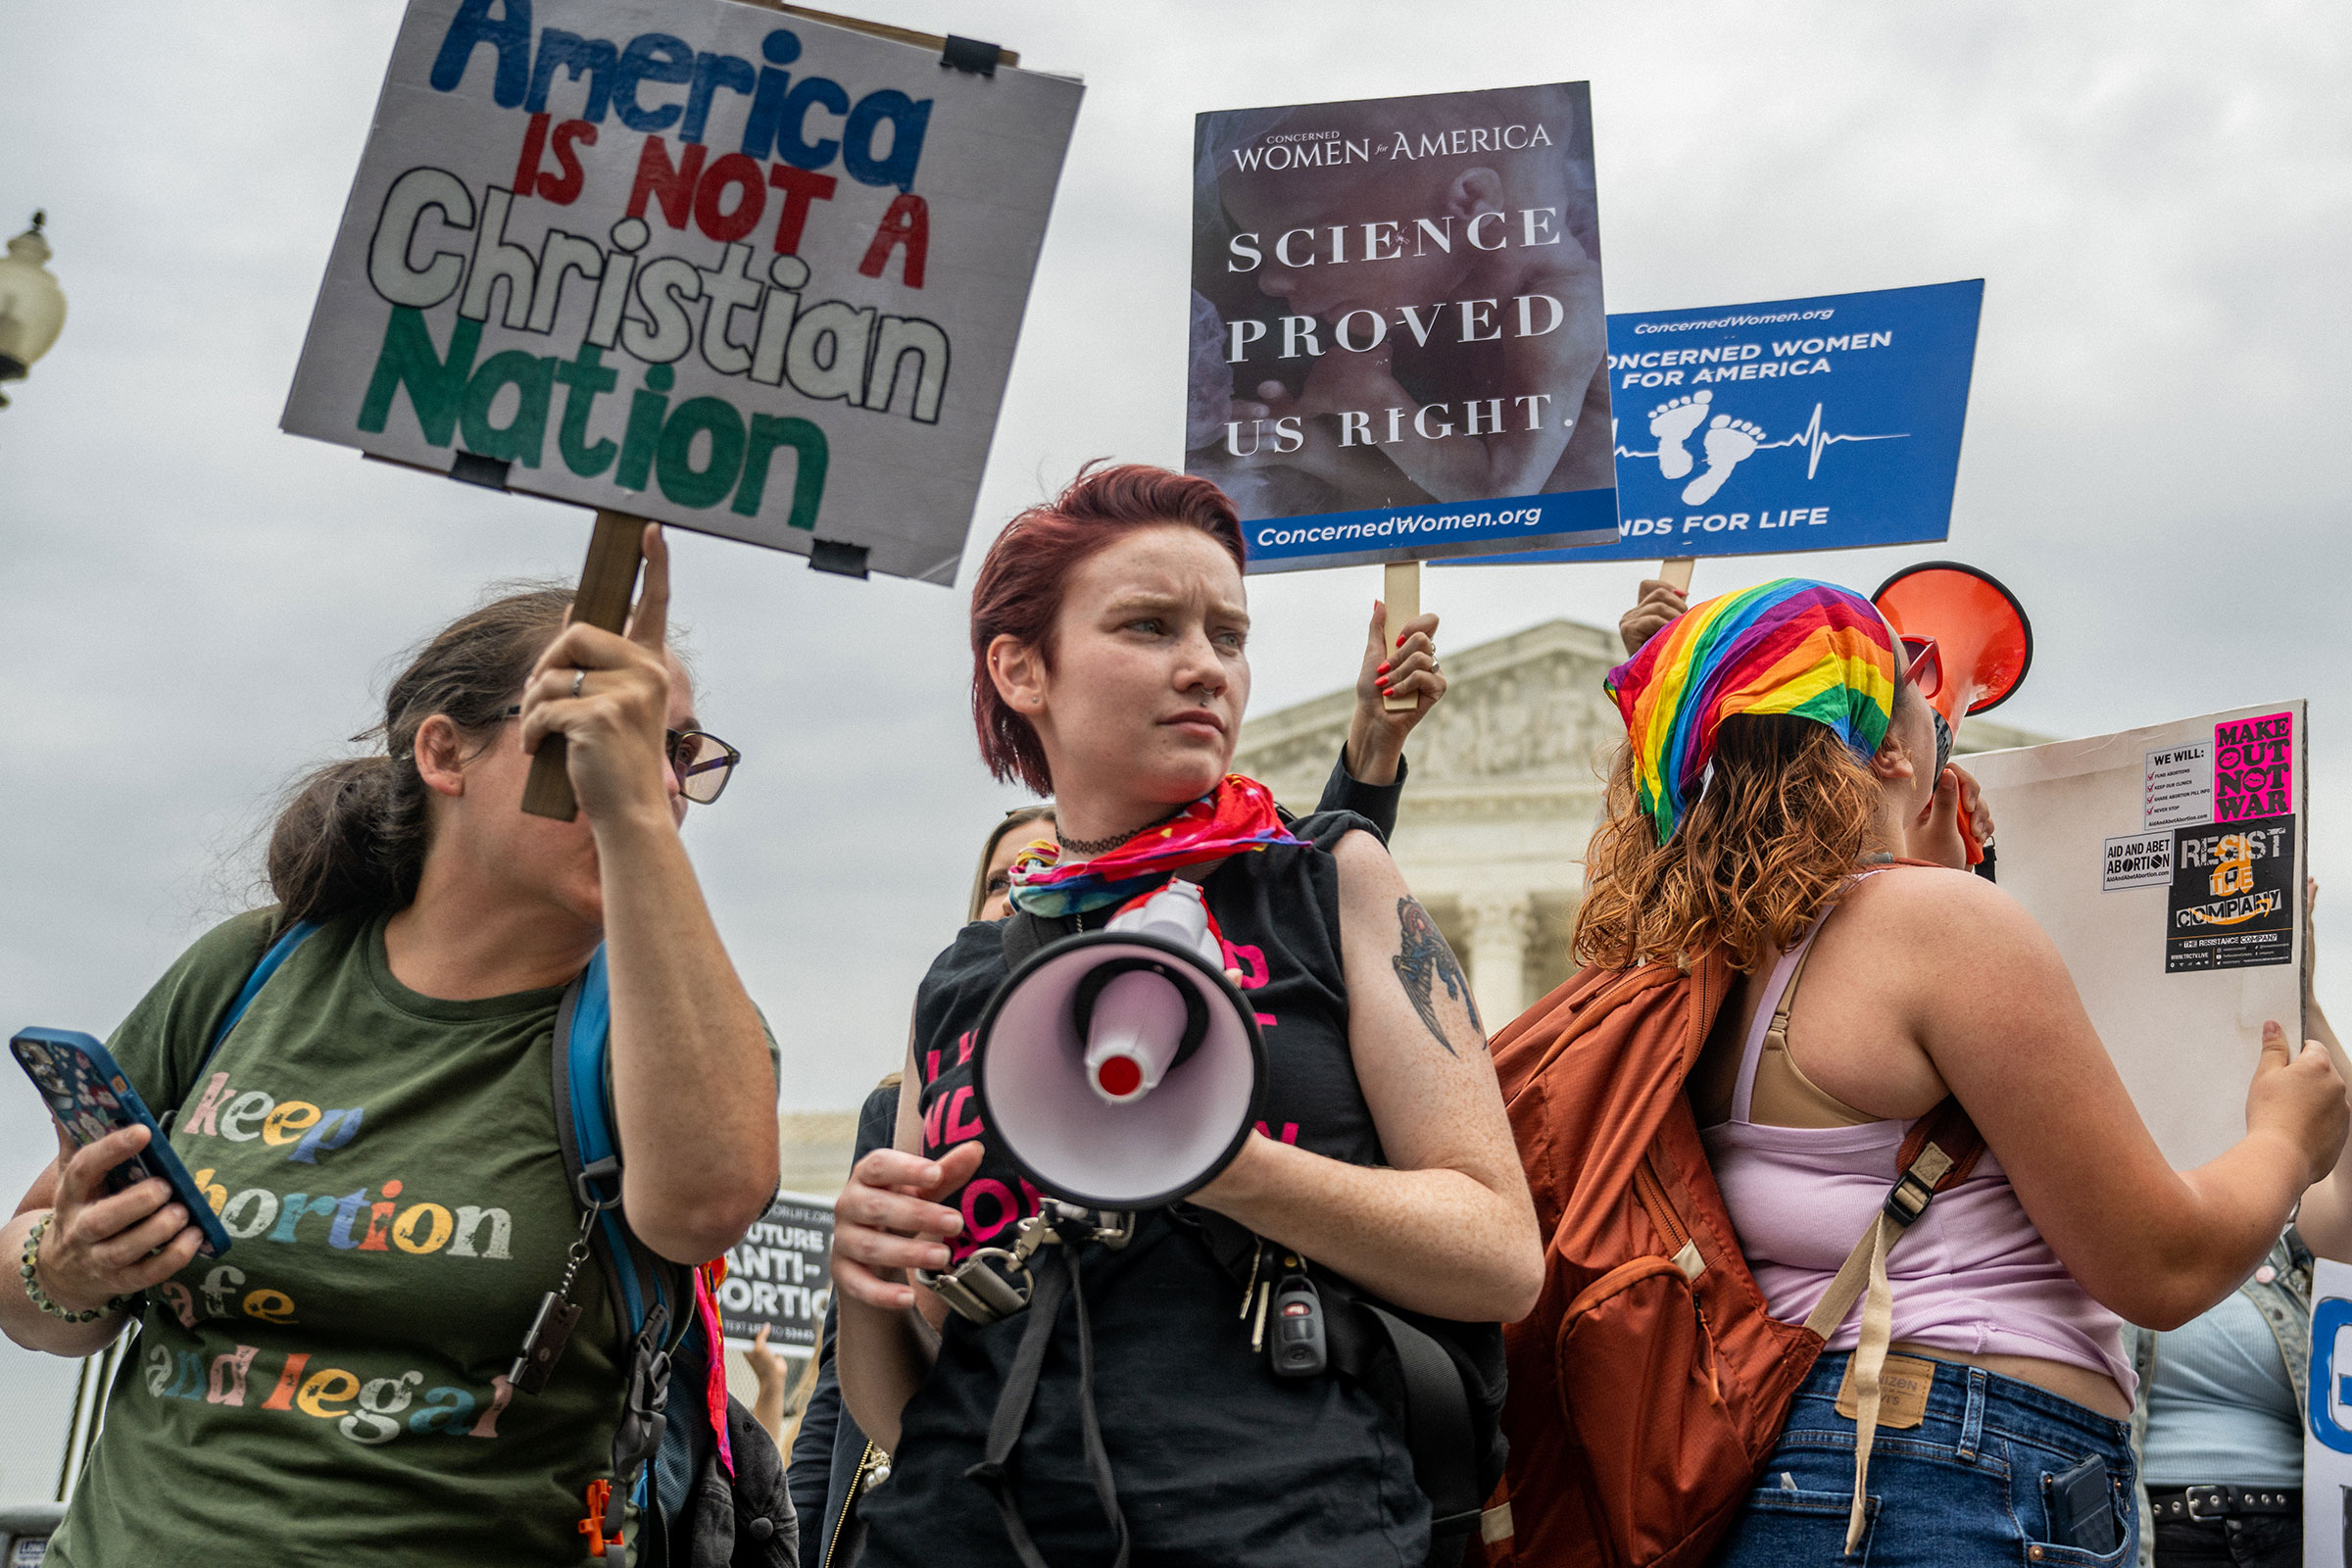 Anti-abortion and abortion rights demonstrators rally in front of the Supreme Court Building on June 21. (Brandon Bell—Getty Images)